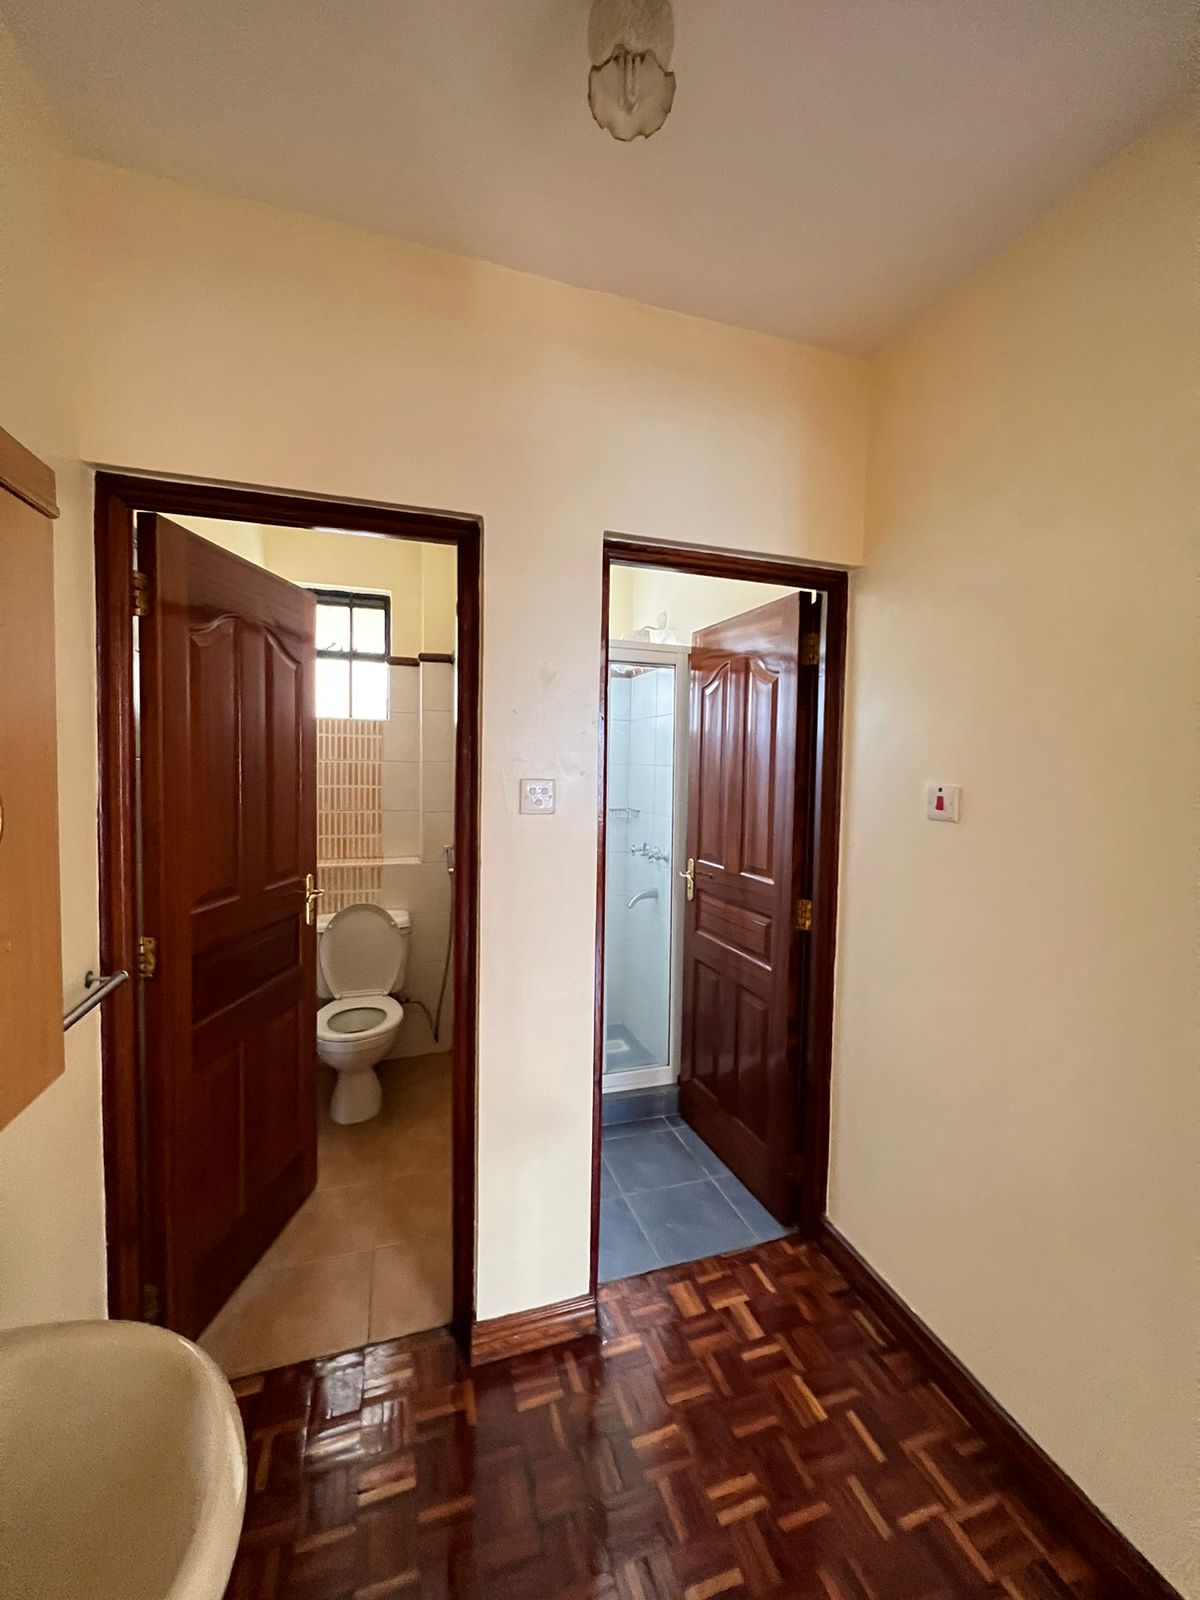 Spacious modern 2 bedroom apartment to let in kilimani, Nairobi. Few units in the compound. ASKING PRICE 65K. Musili homes